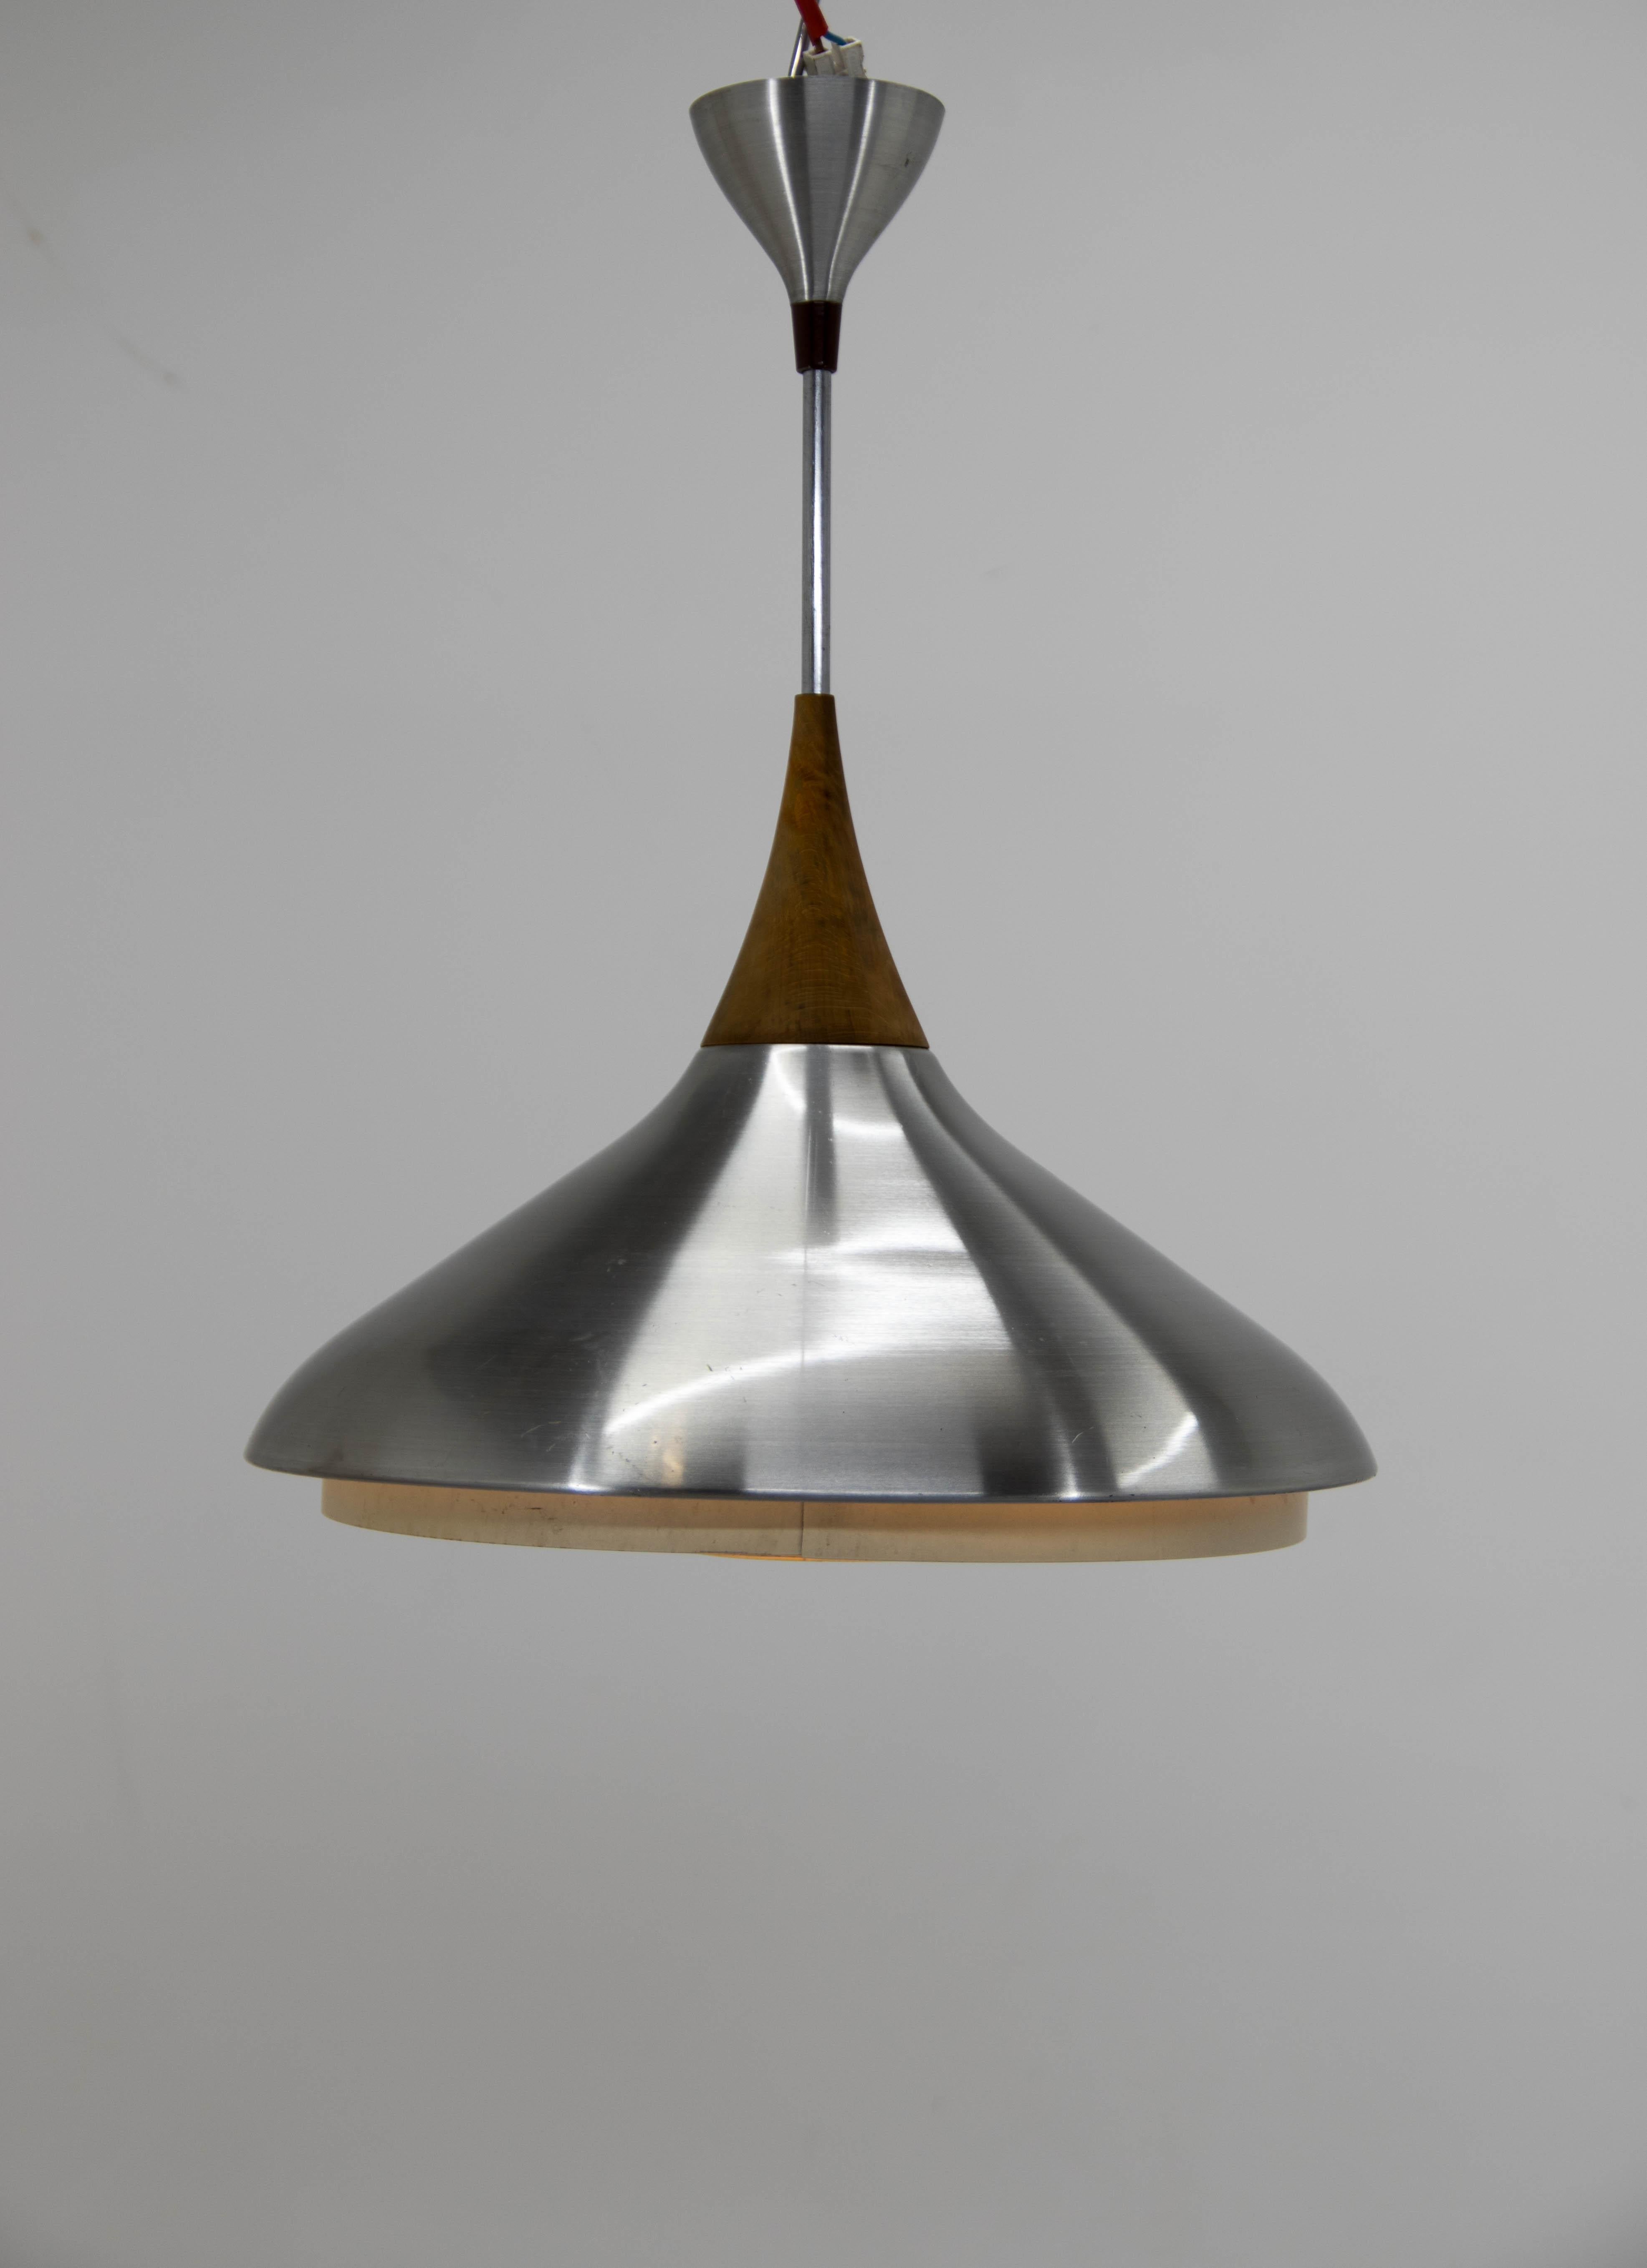 Aluminum and wood pendant.
1x60W E25 bulb
US wiring compatible
Minor scratches on a shade.